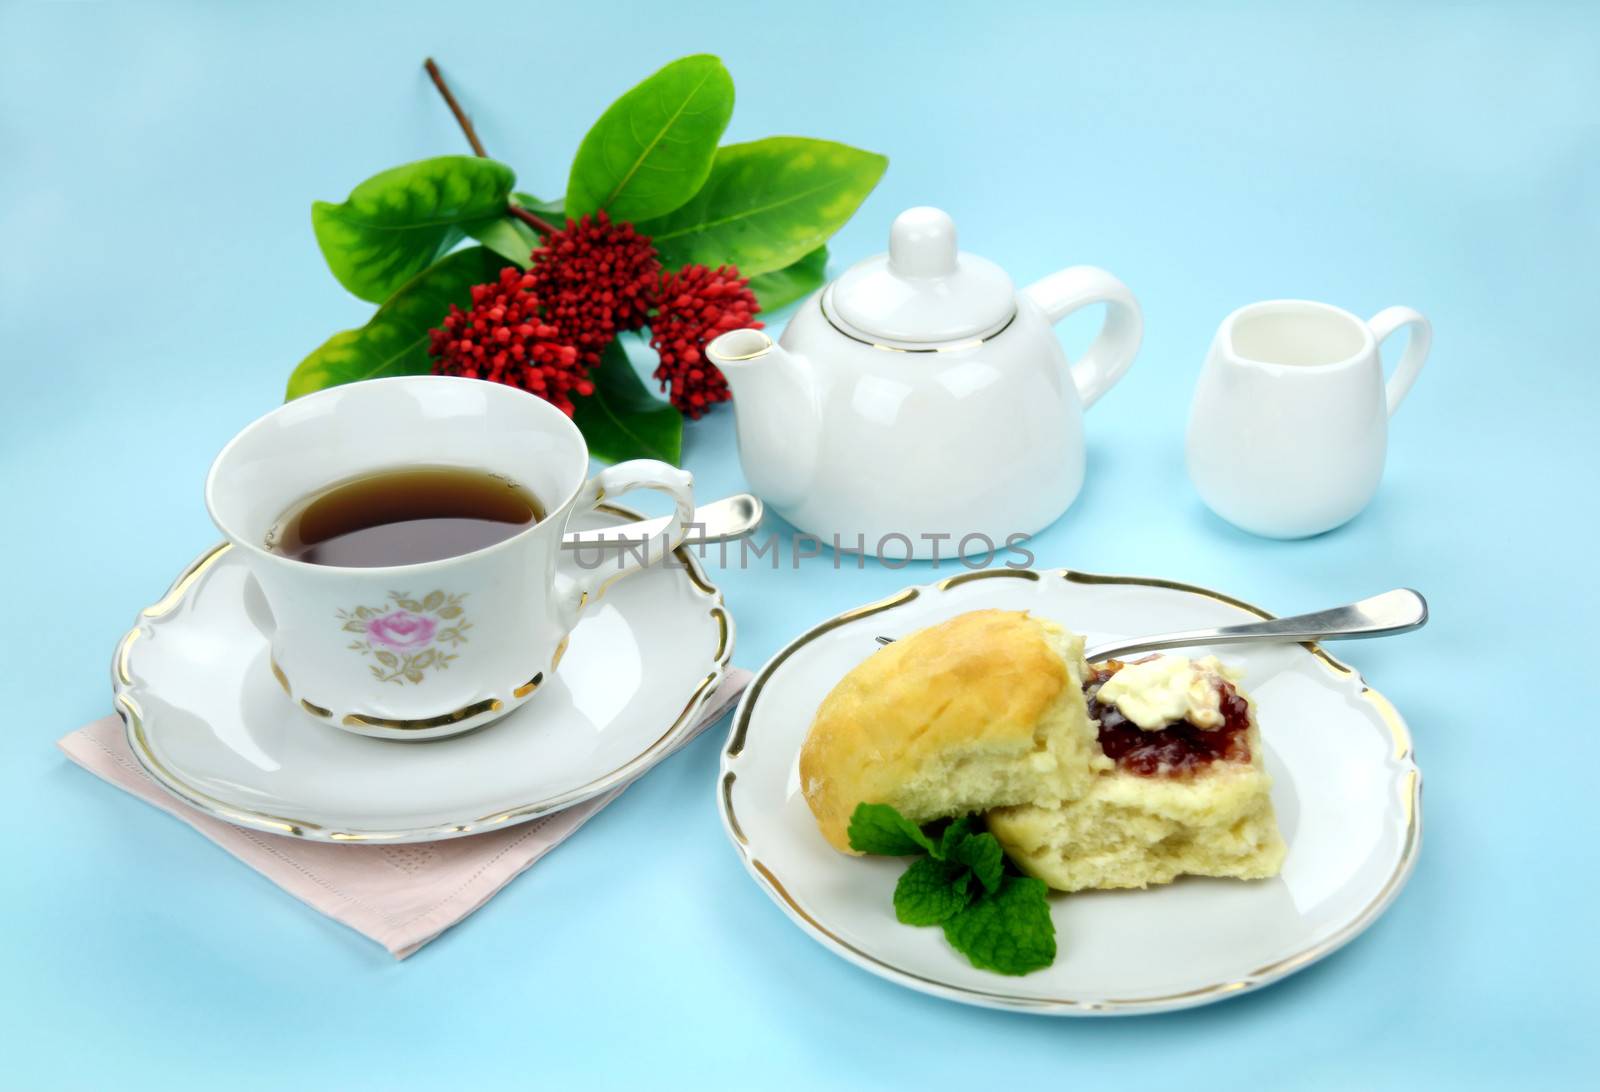 Fresh baked scones with jam and cream with a refreshing cup of tea.